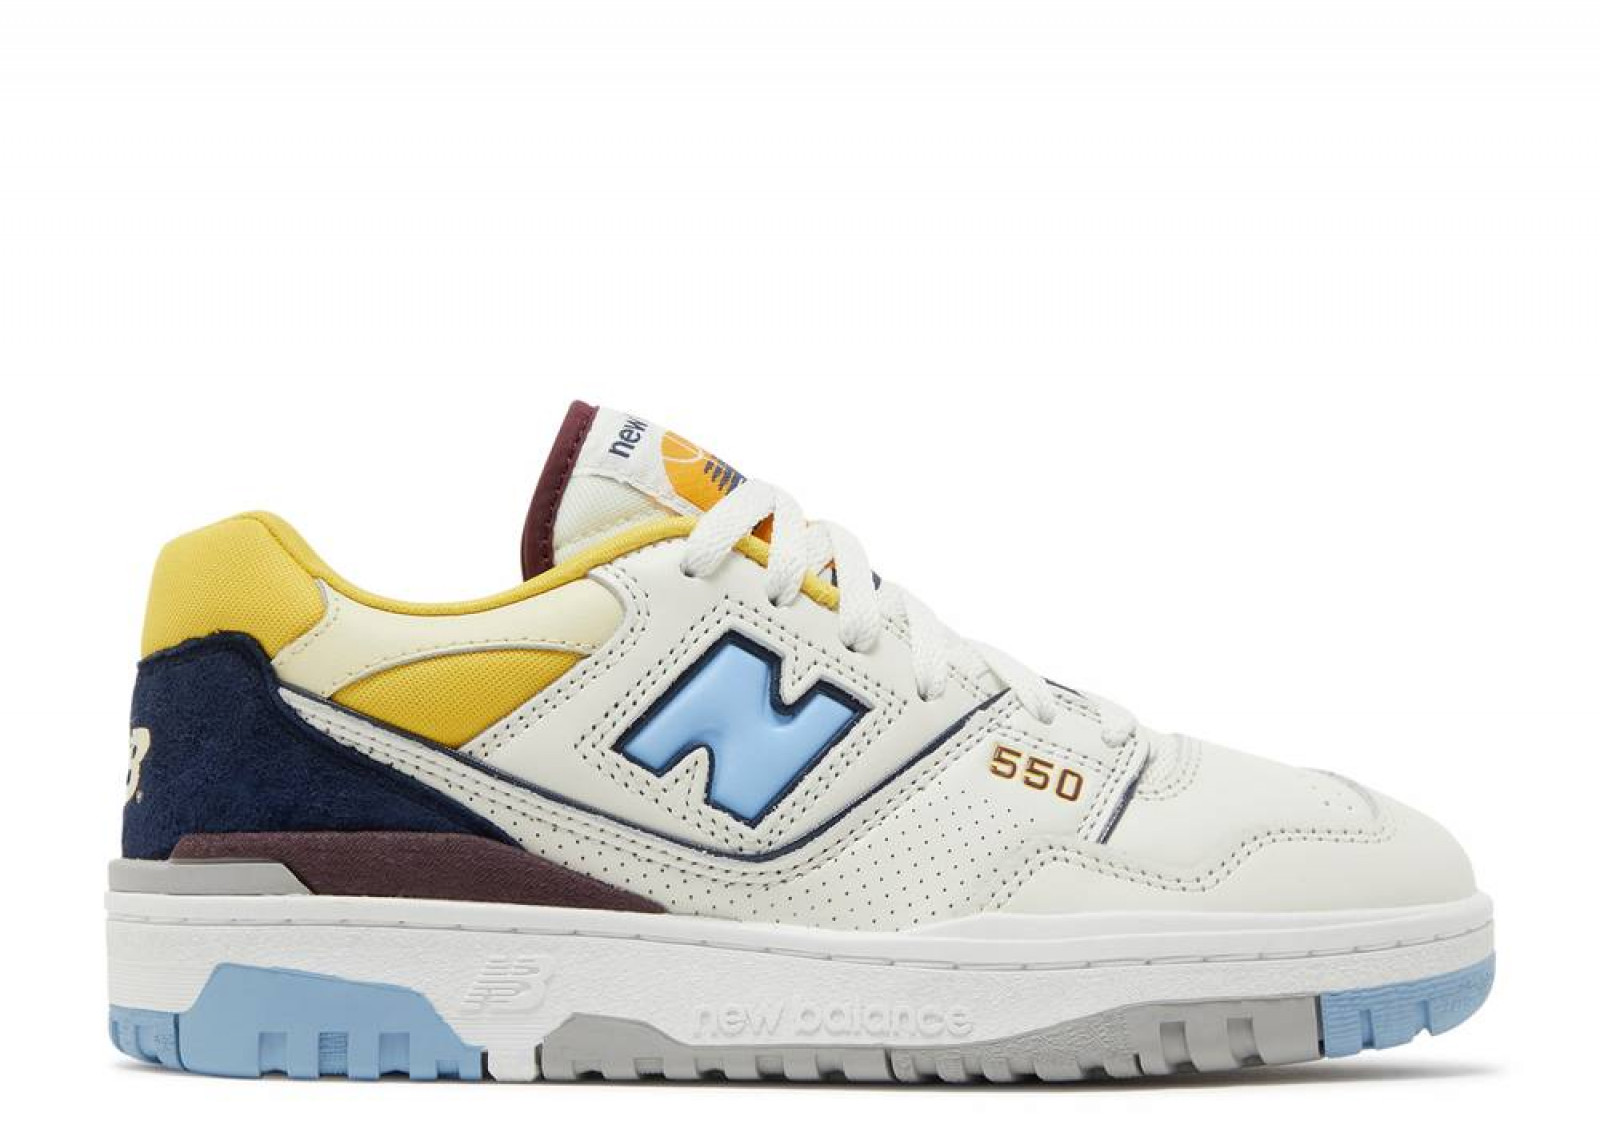 NEW BALANCE 550 MARQUETTE | Level Up